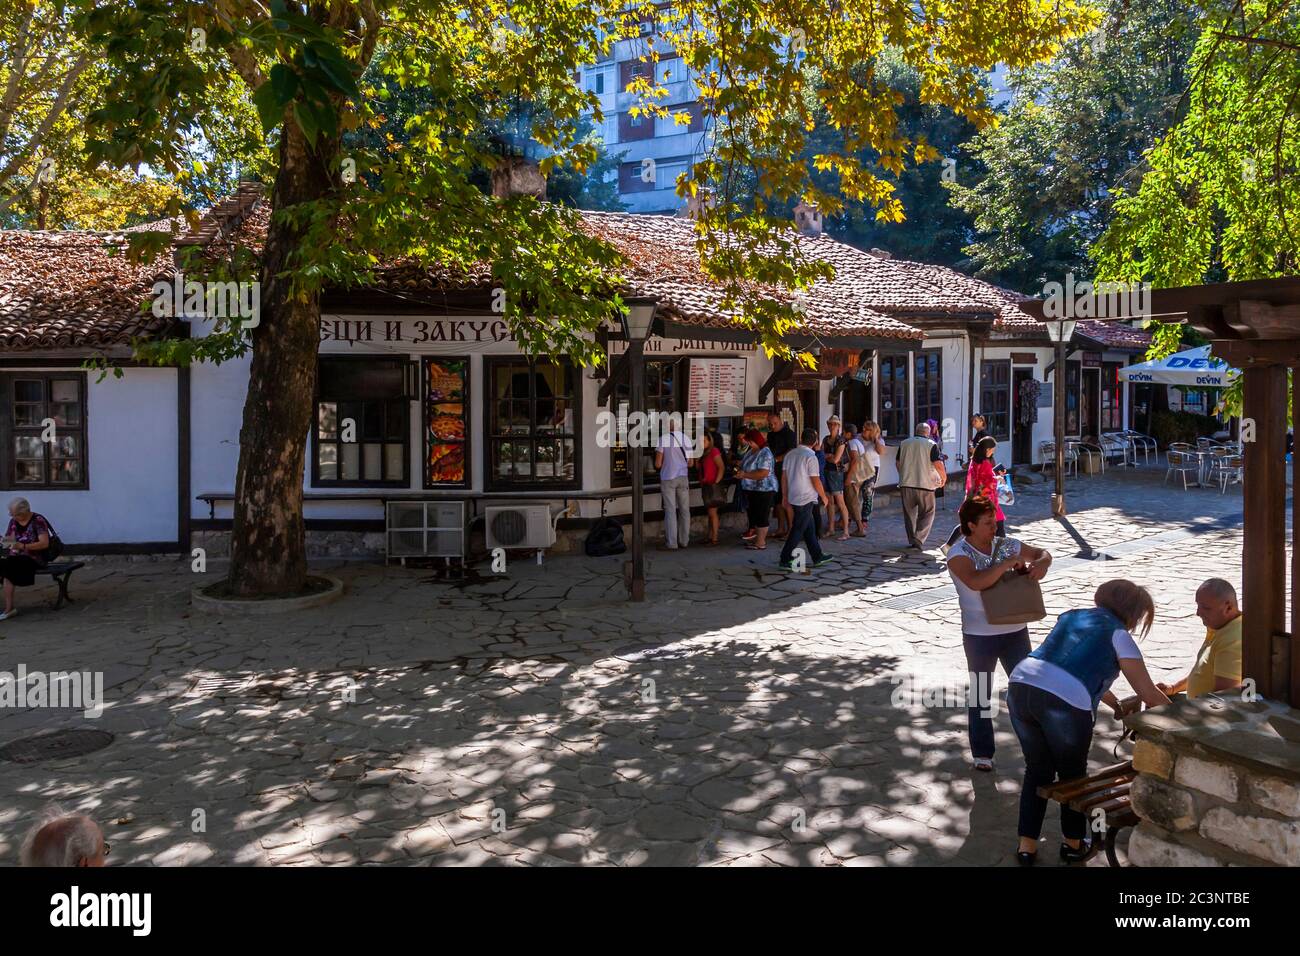 Queue of buyers in front of a bakery in Dobrich, Bulgaria Stock Photo